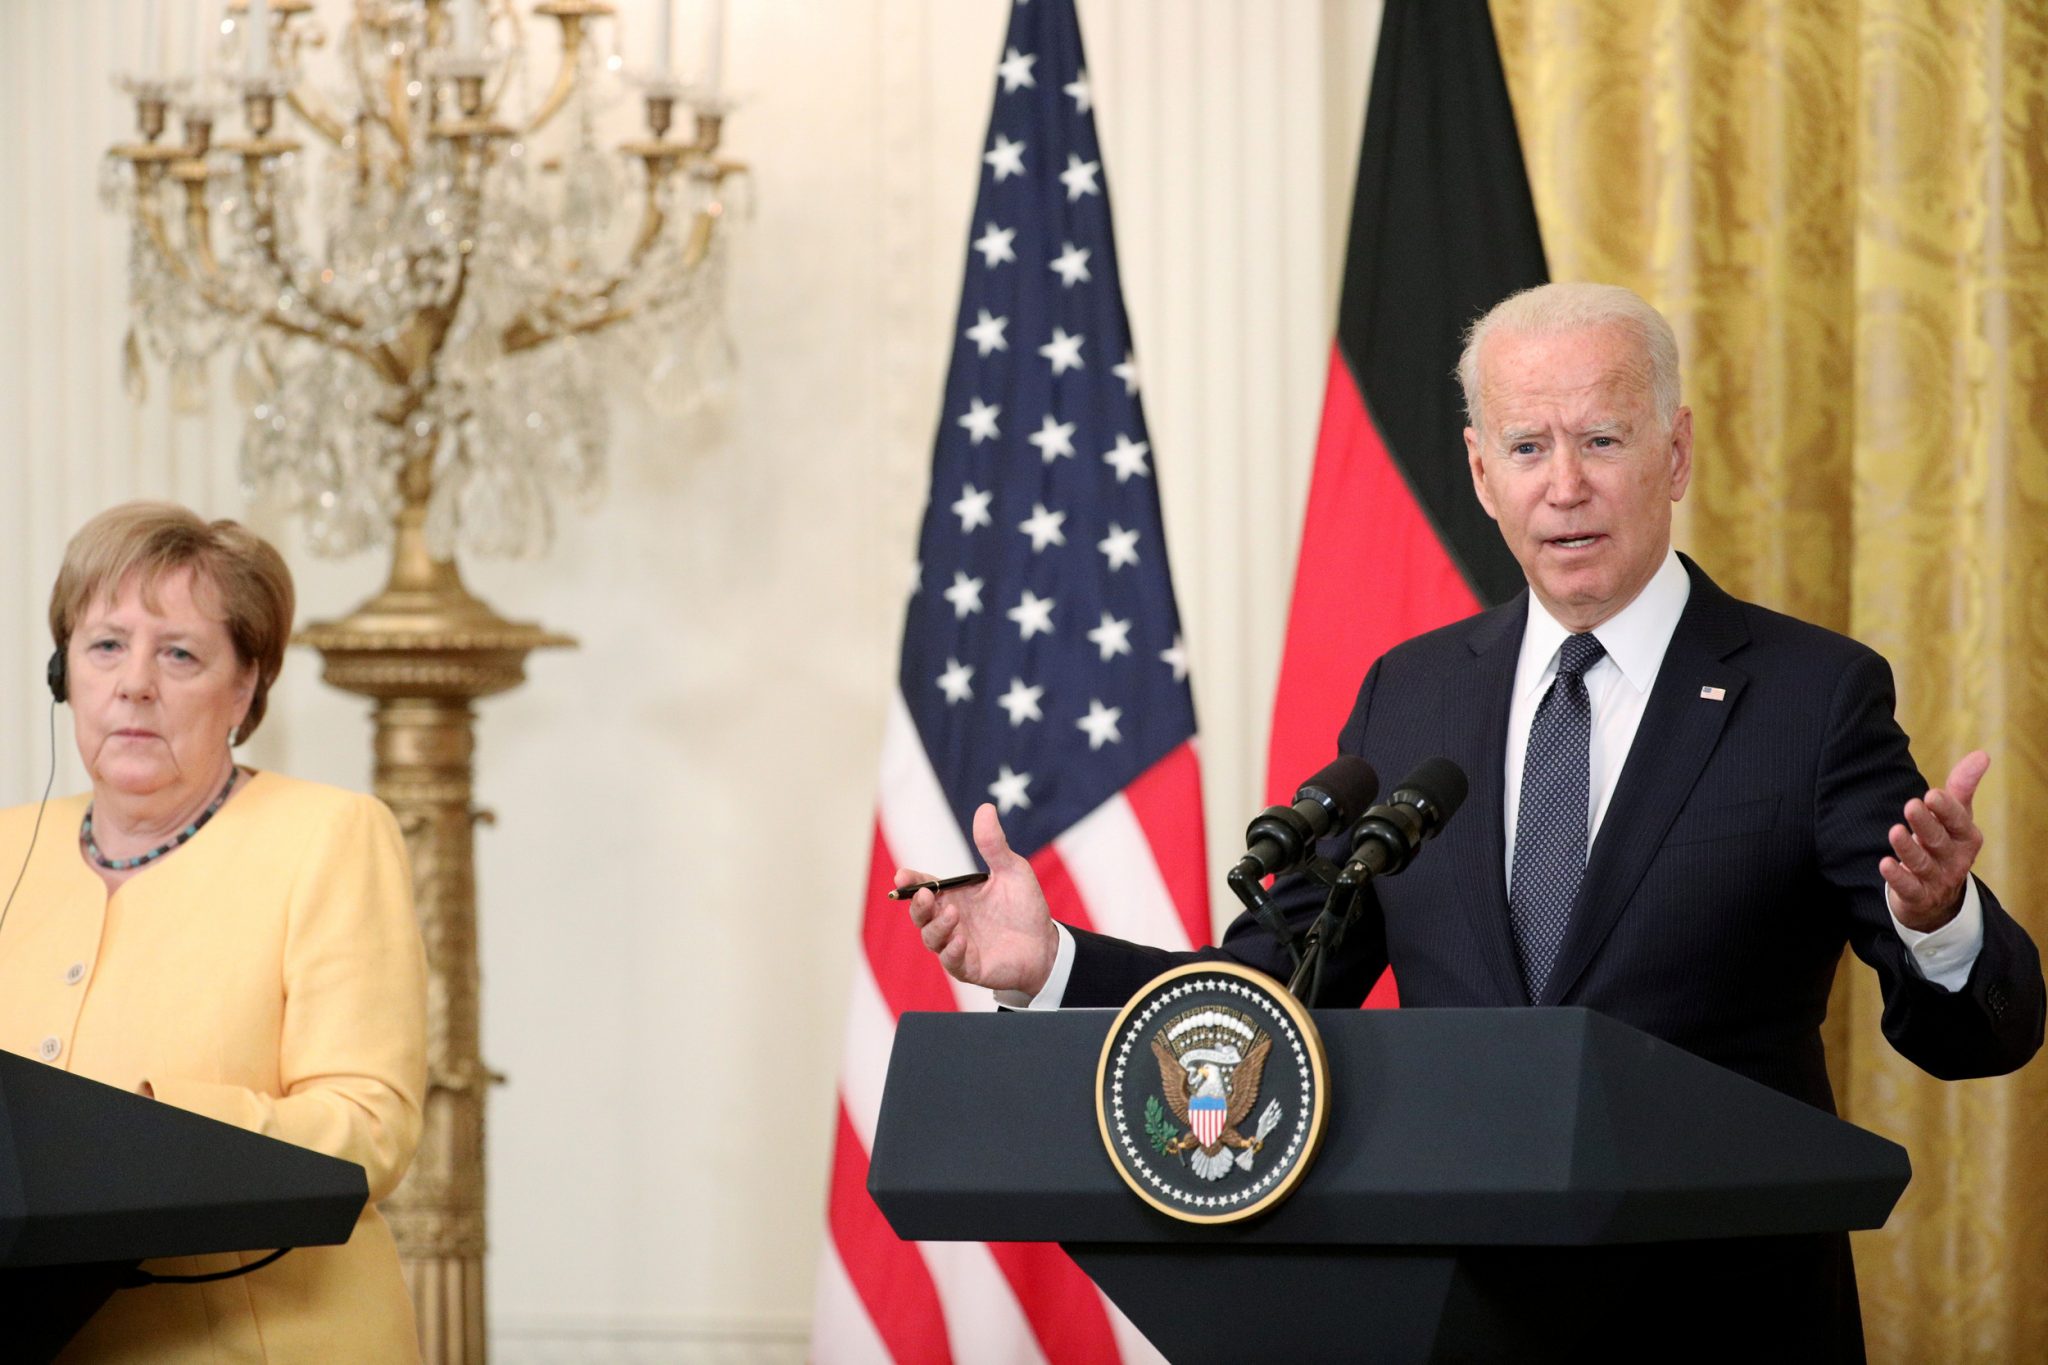 U.S. President Joe Biden and German Chancellor Angela Merkel attended a joint news conference in the East Room at the White House  on July 15, 2021.